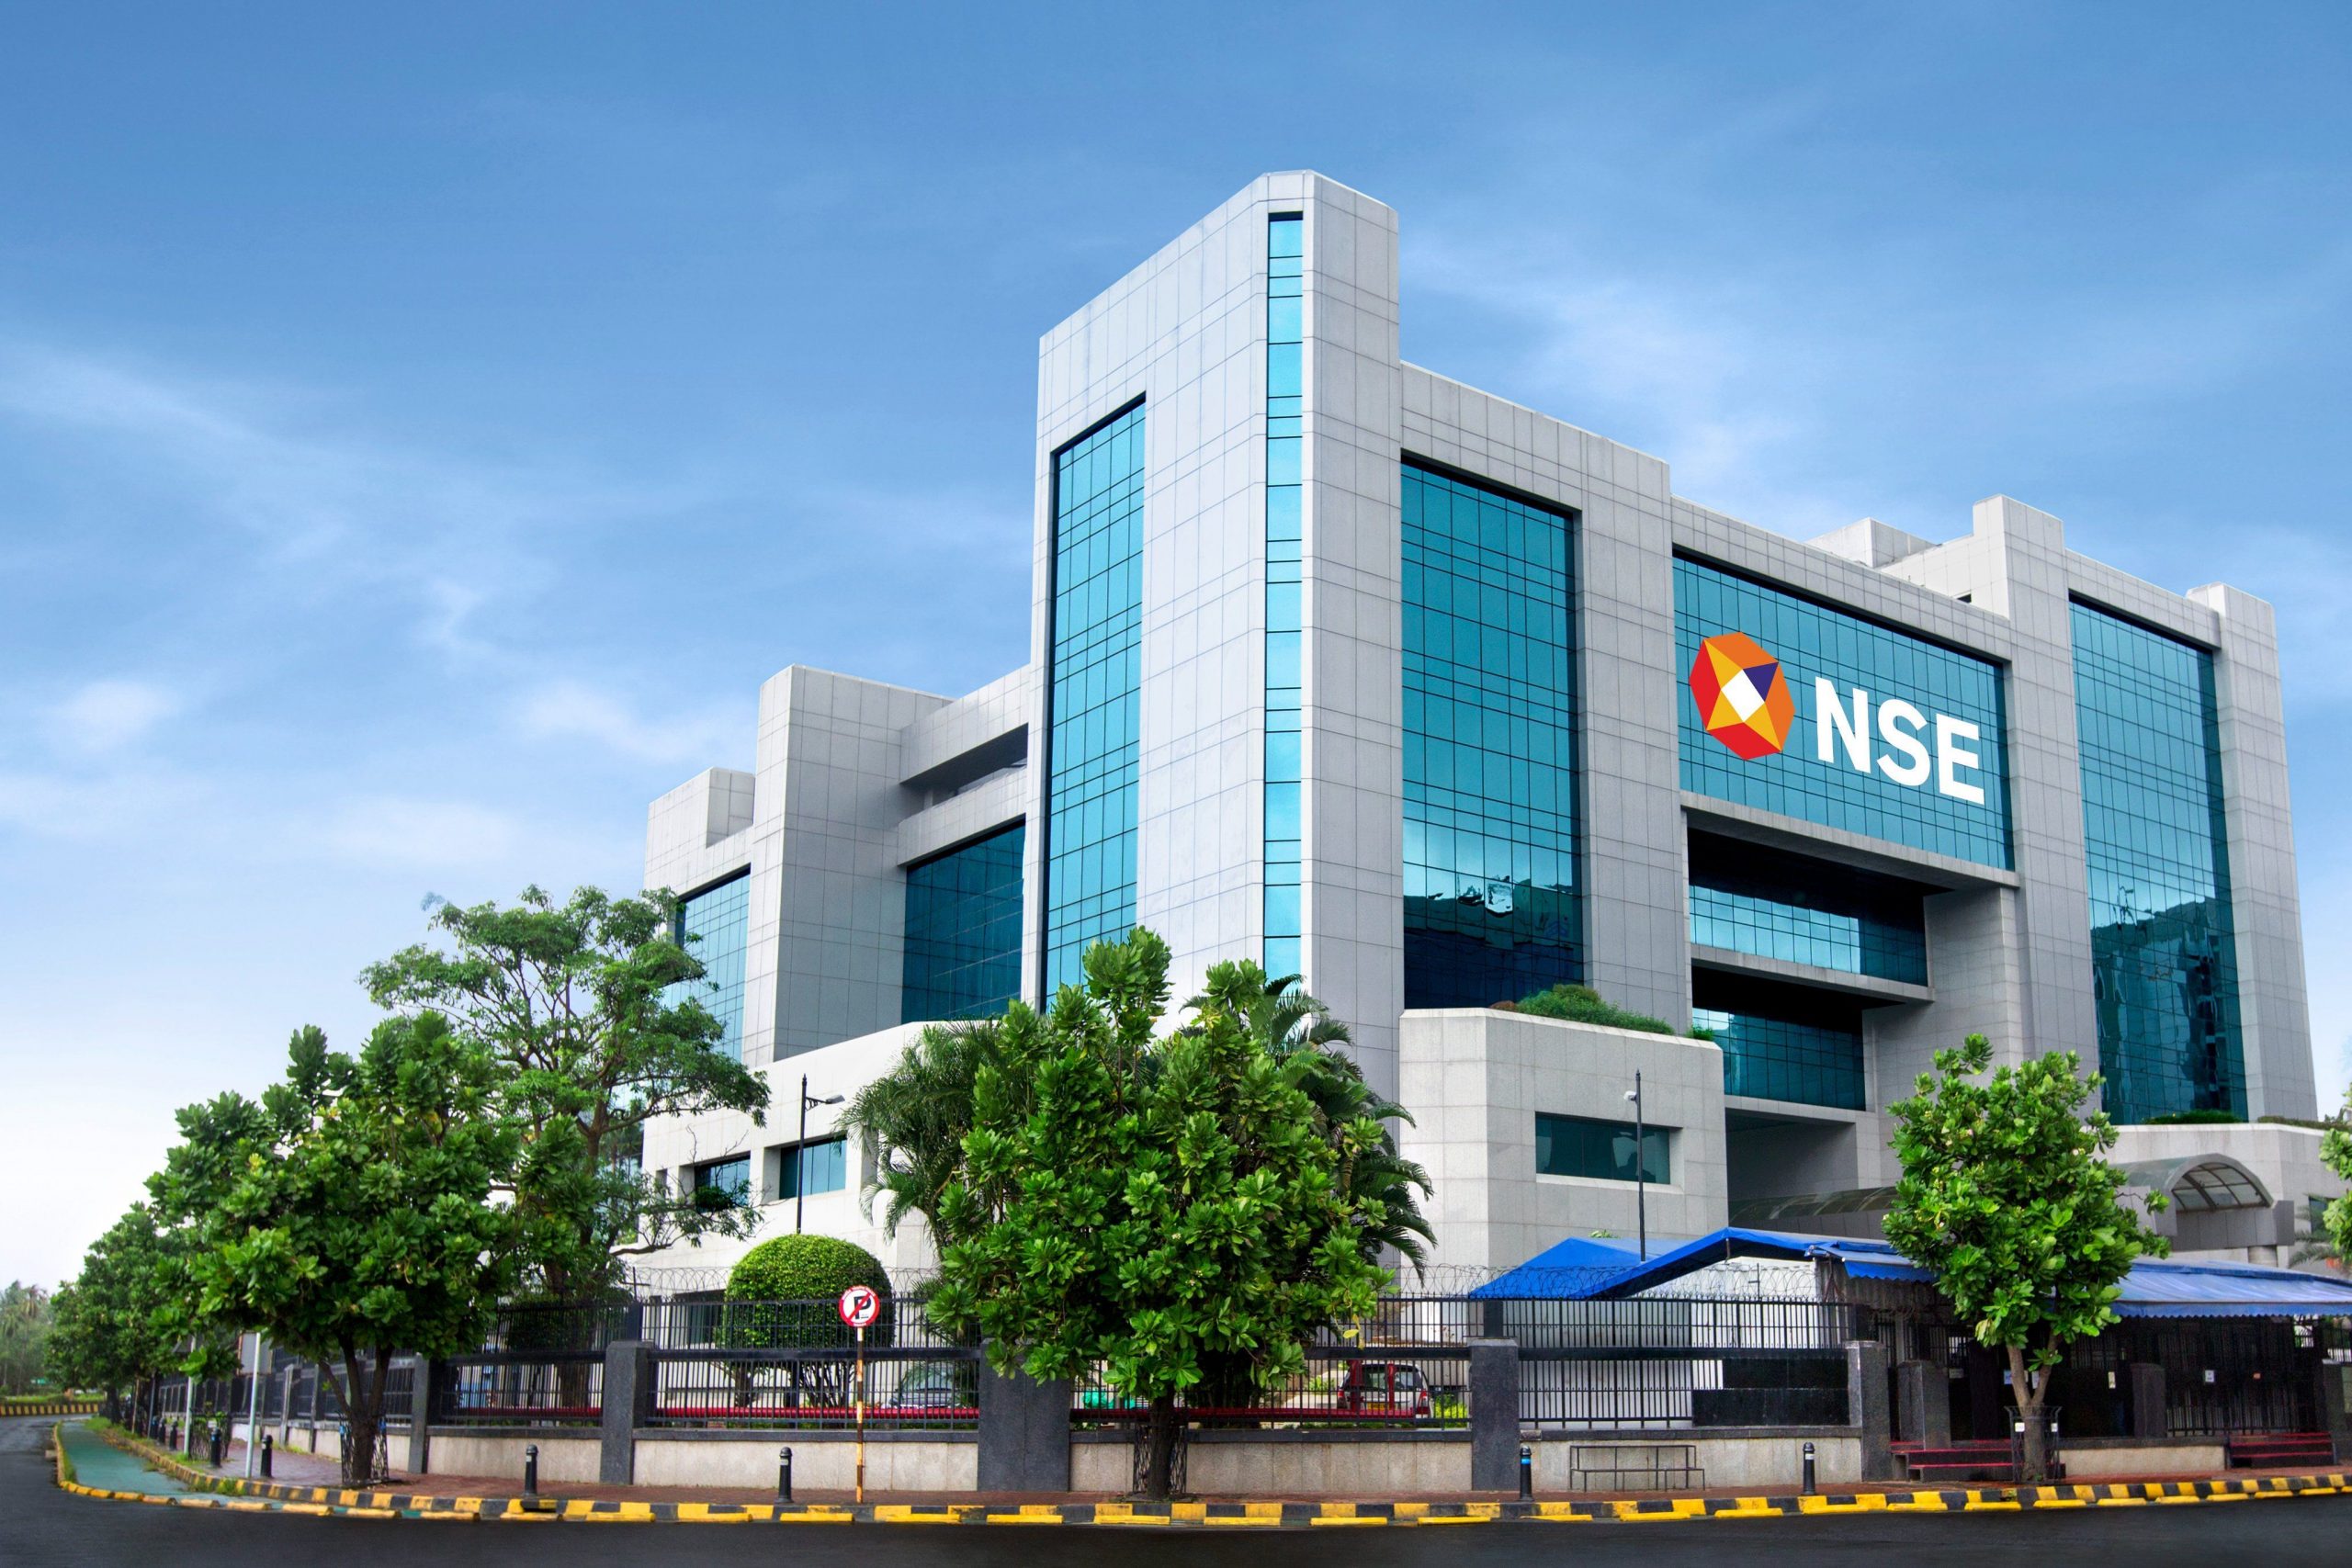 NSE F&O Ban: No stock has been put under ban on Monday, August 1, 2022